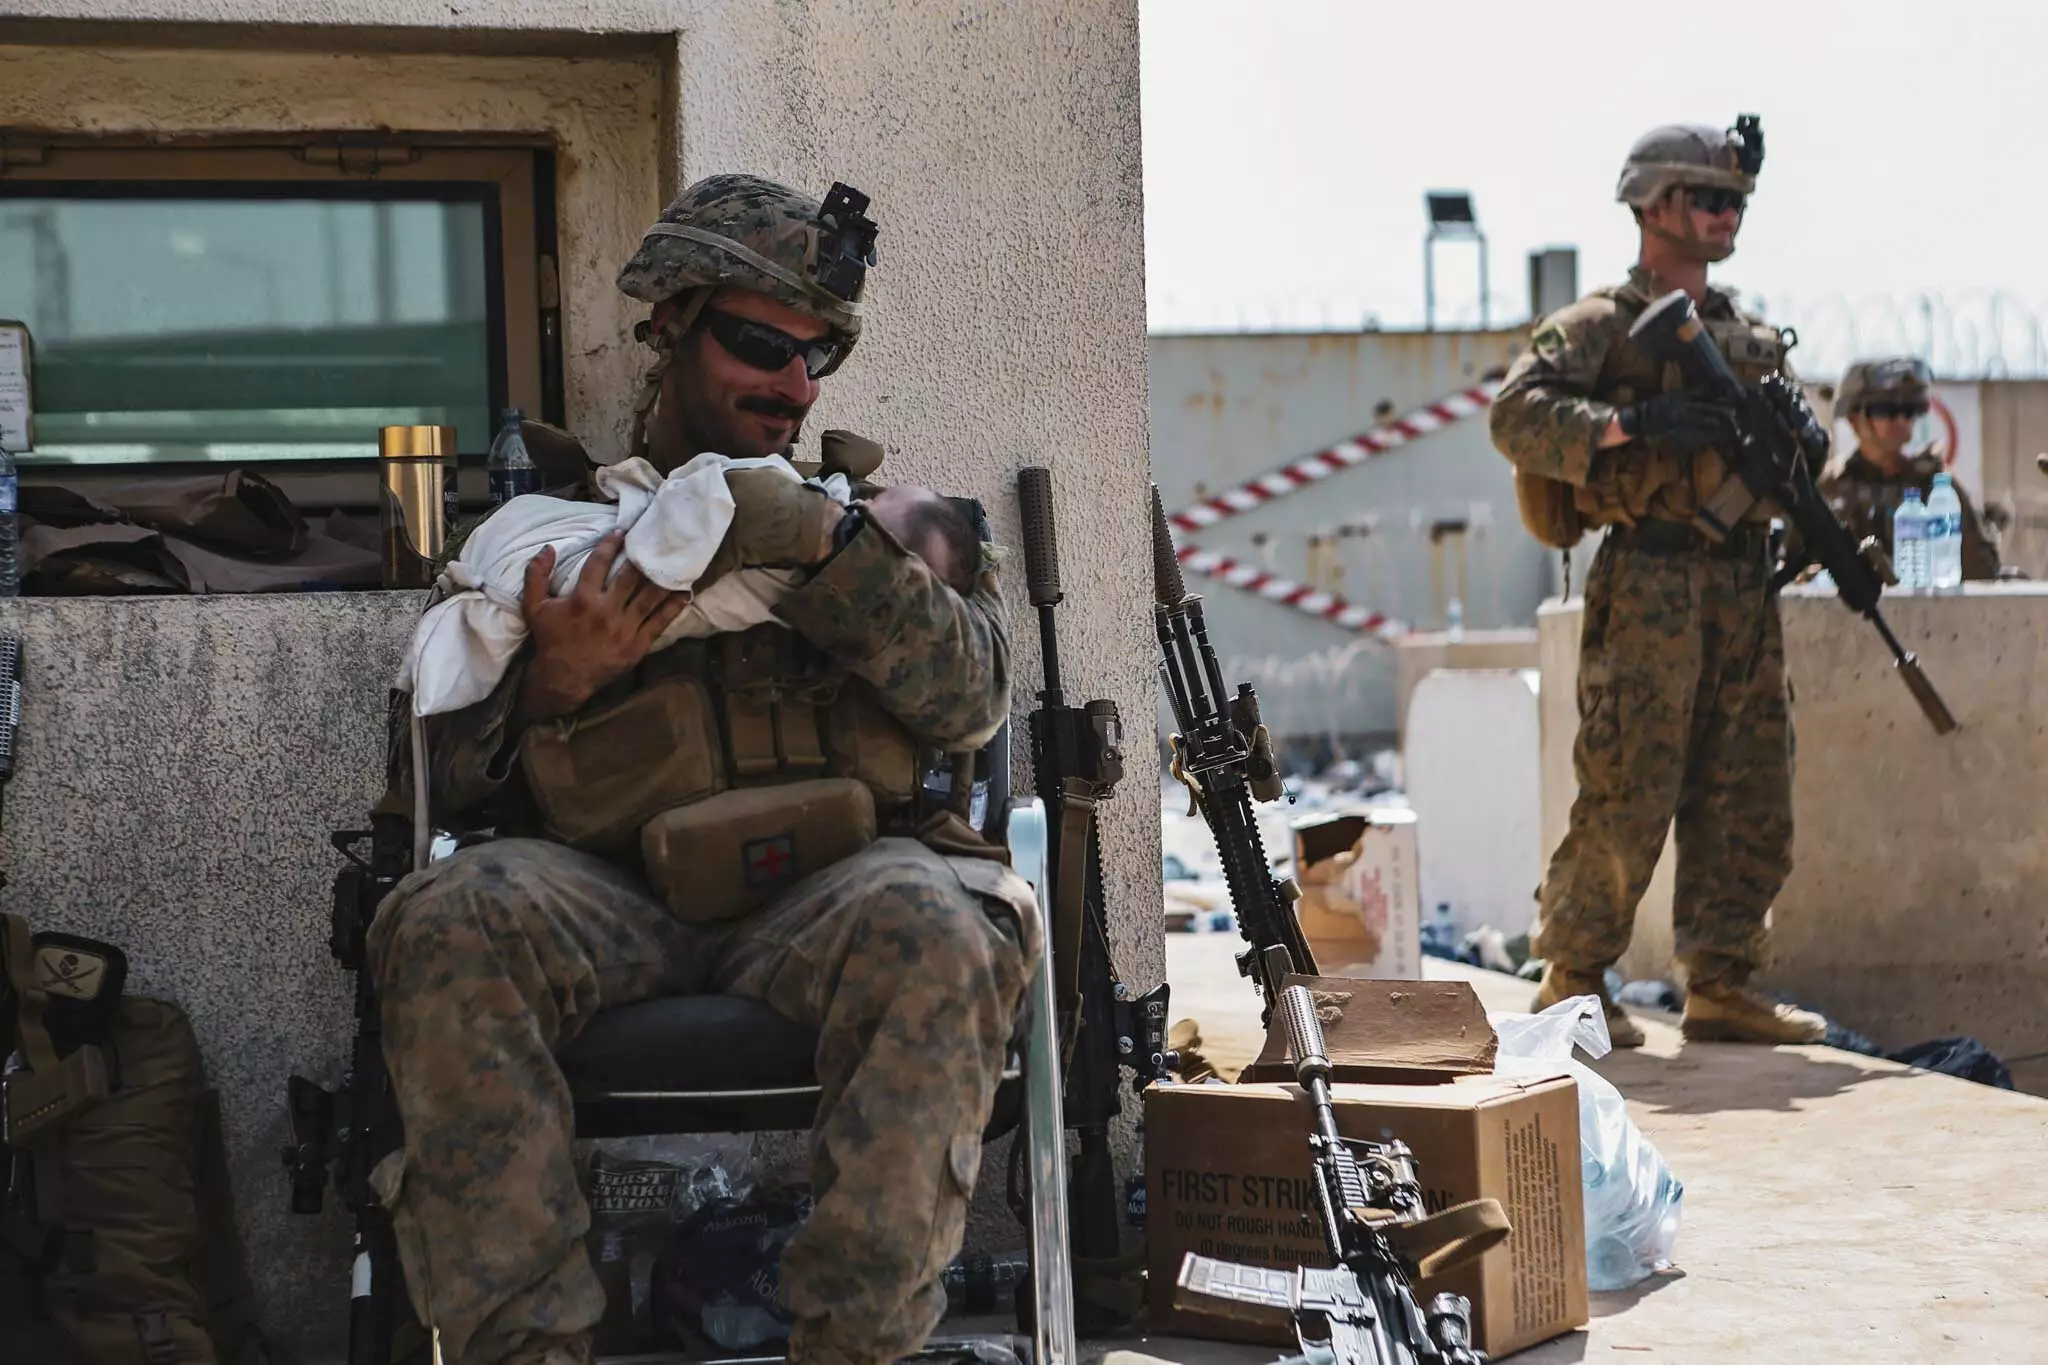 A Marine assigned to the 24th Marine Expeditionary Unit (MEU) calms an infant during an evacuation at Hamid Karzai International Airport, Kabul.